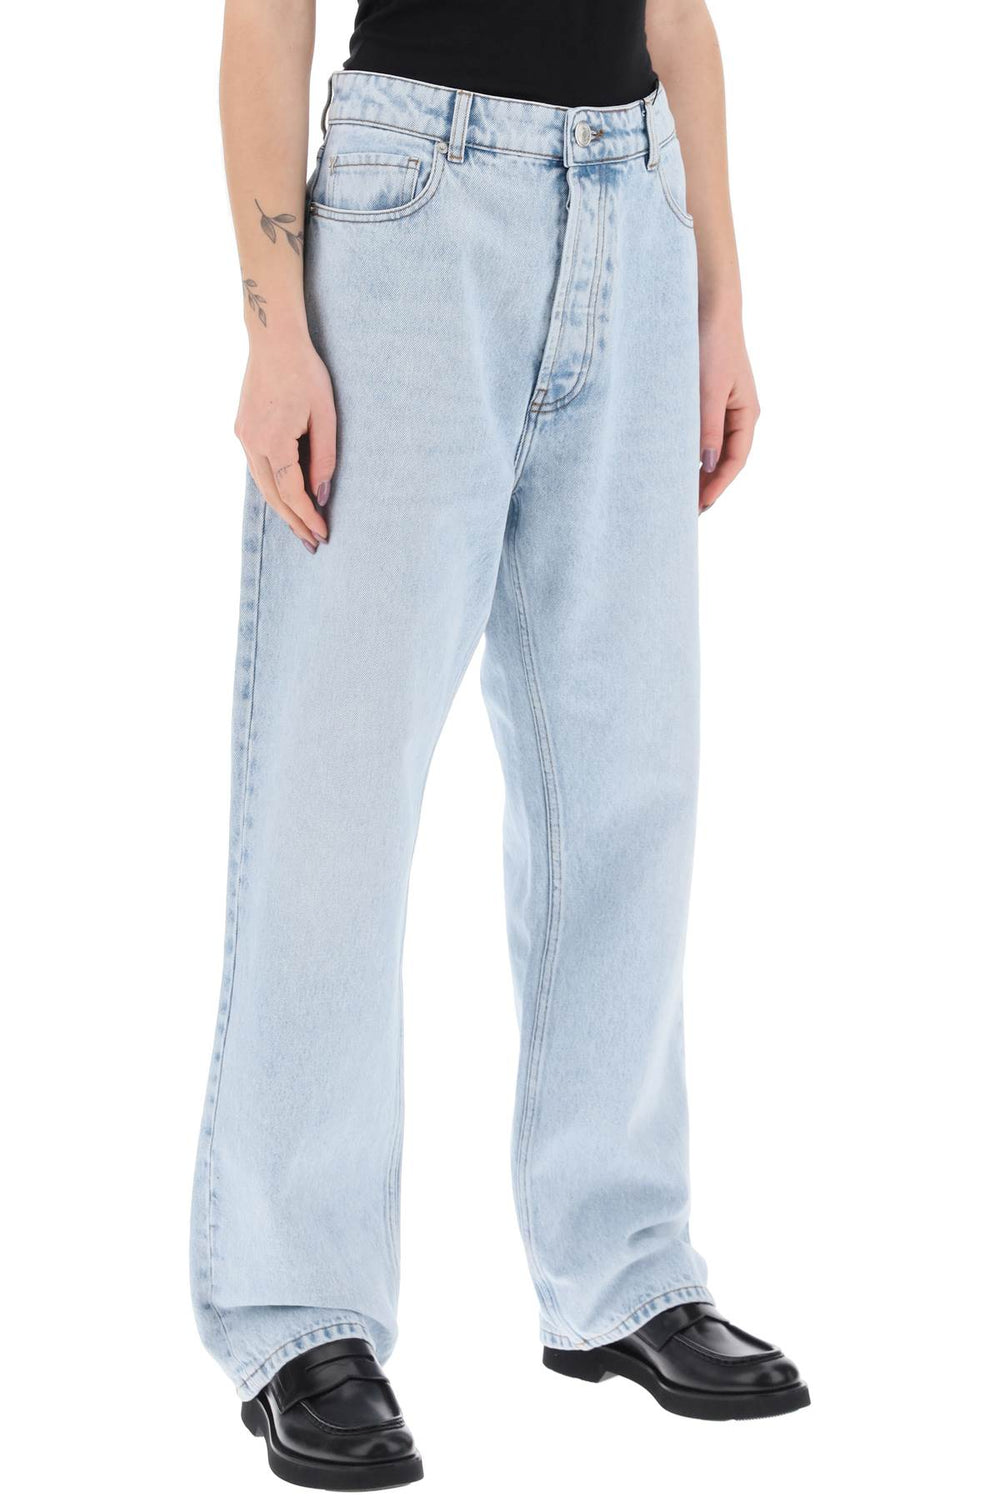 Ami paris wide leg denim jeans with a relaxed fit-1